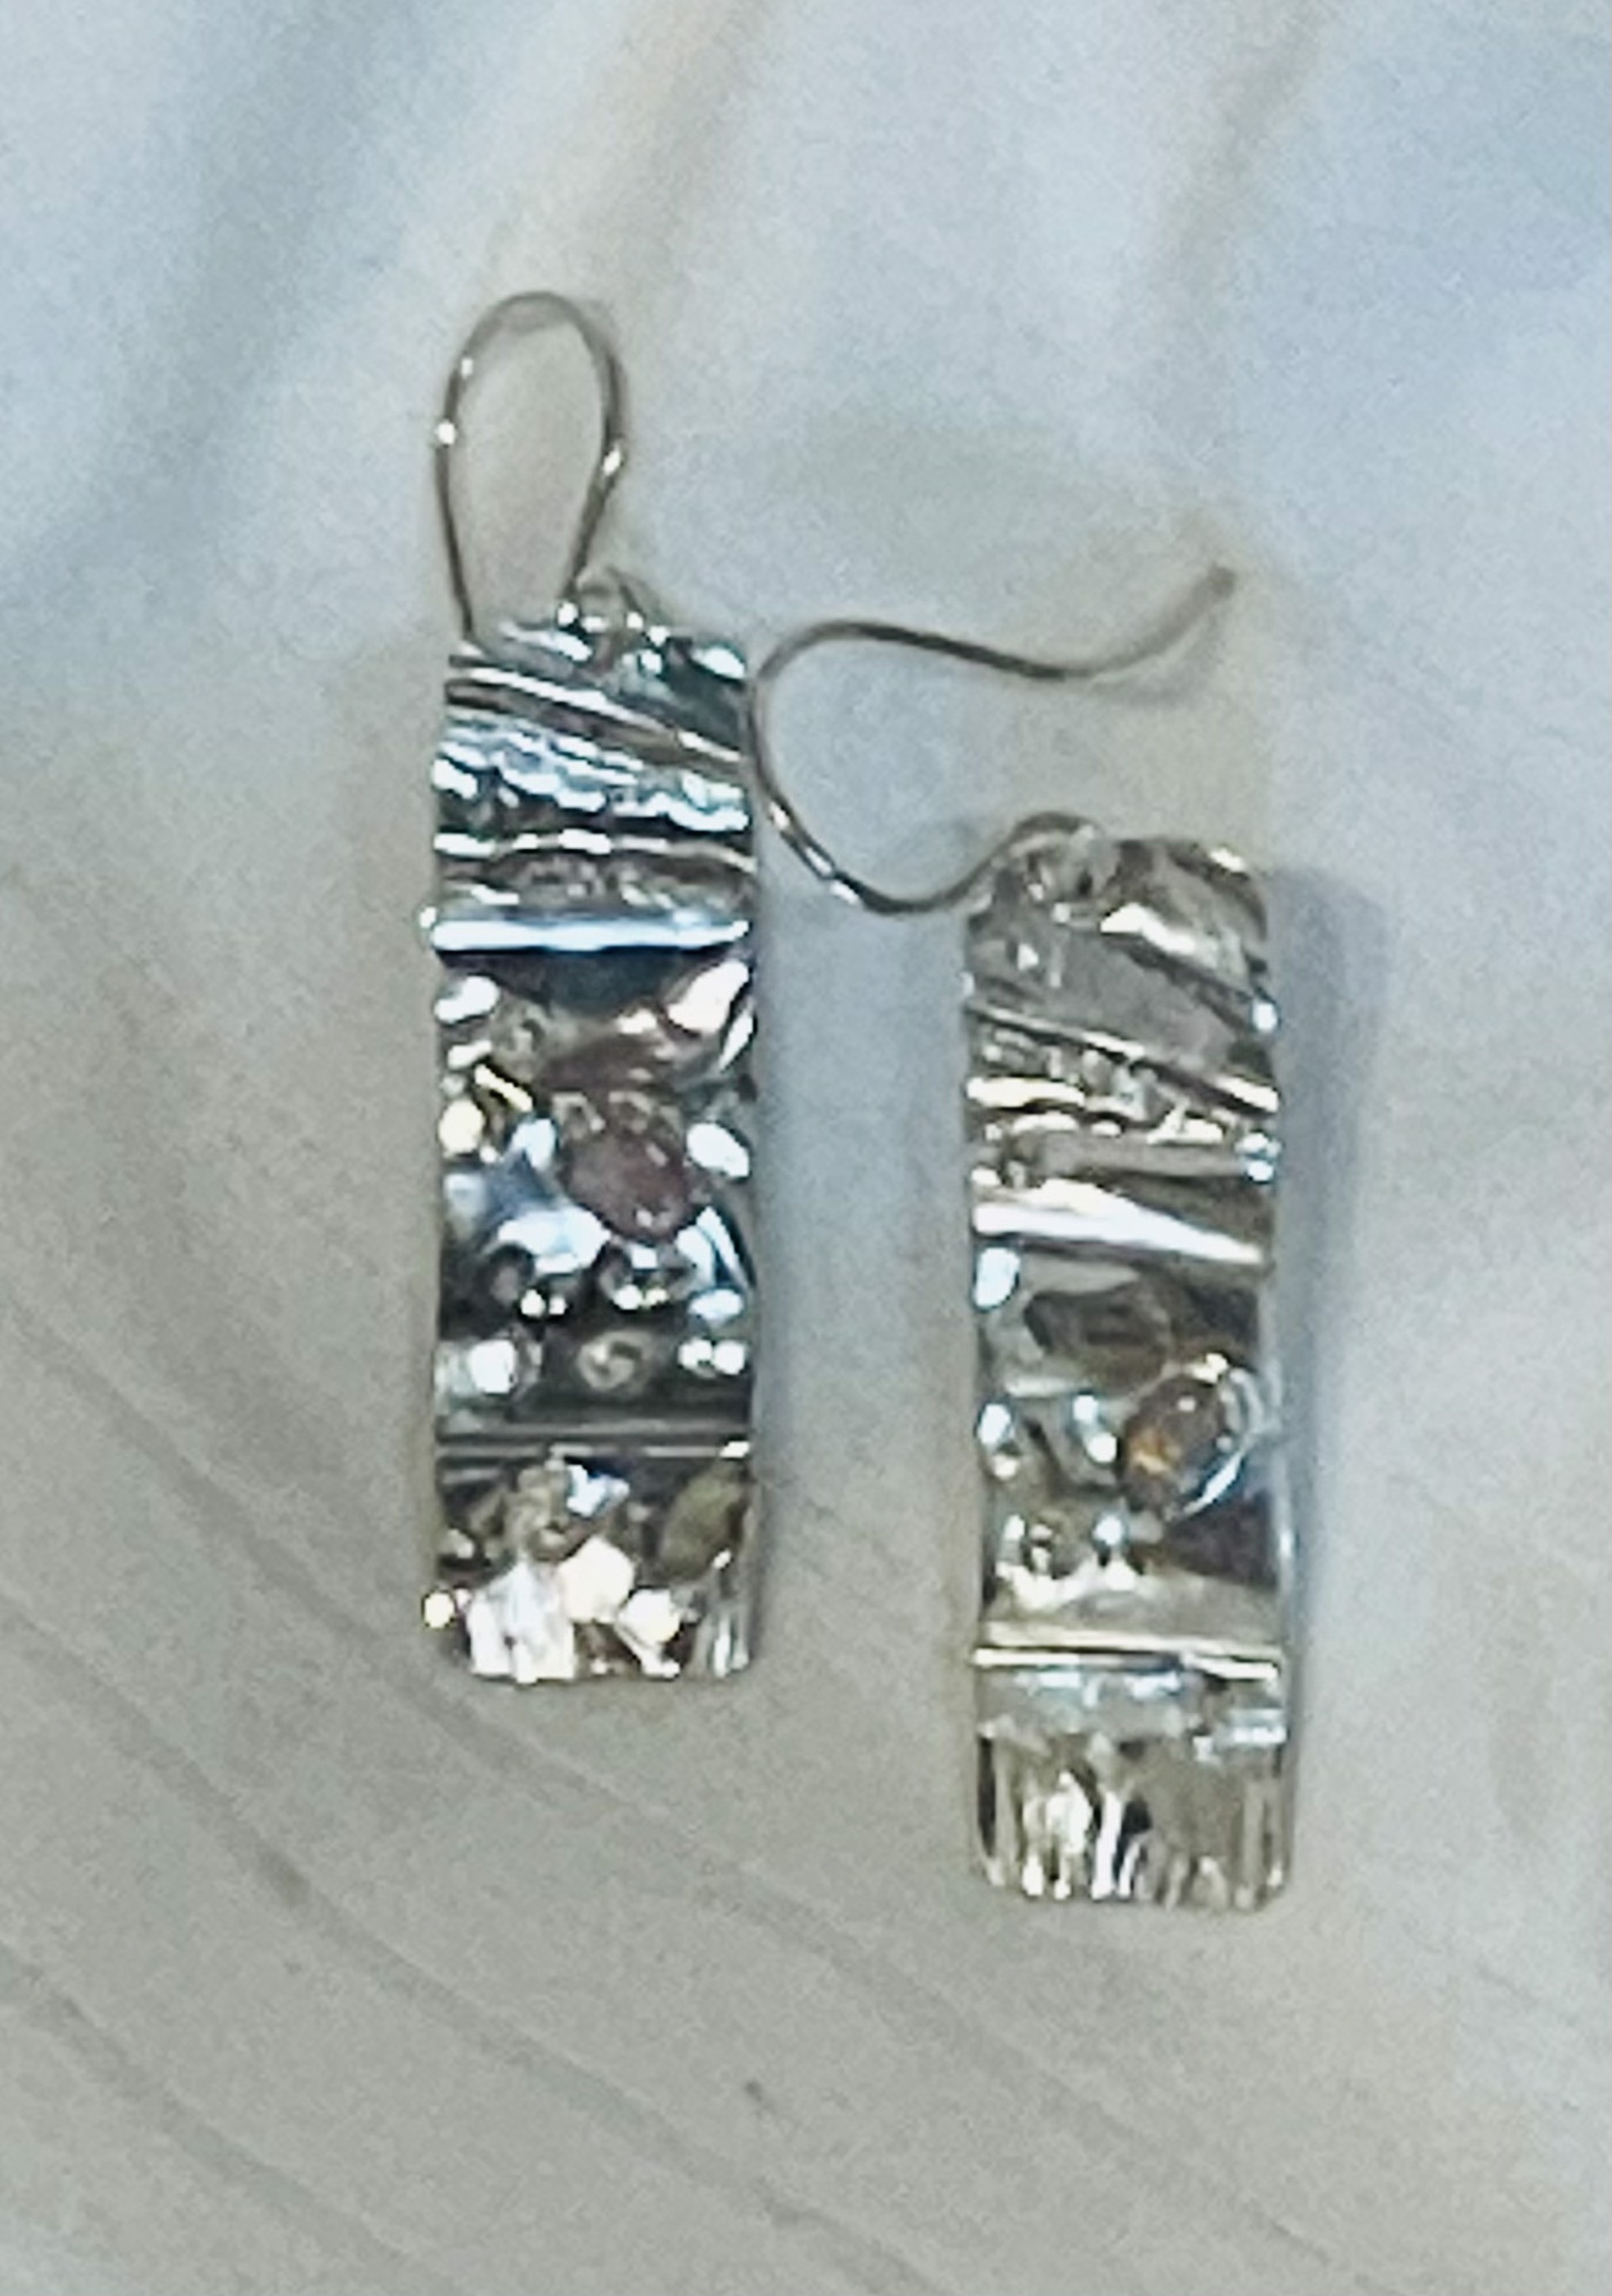 Earrings - Sterling Silver Fold Formed and Hammered With Opal DK2847 by Doris King